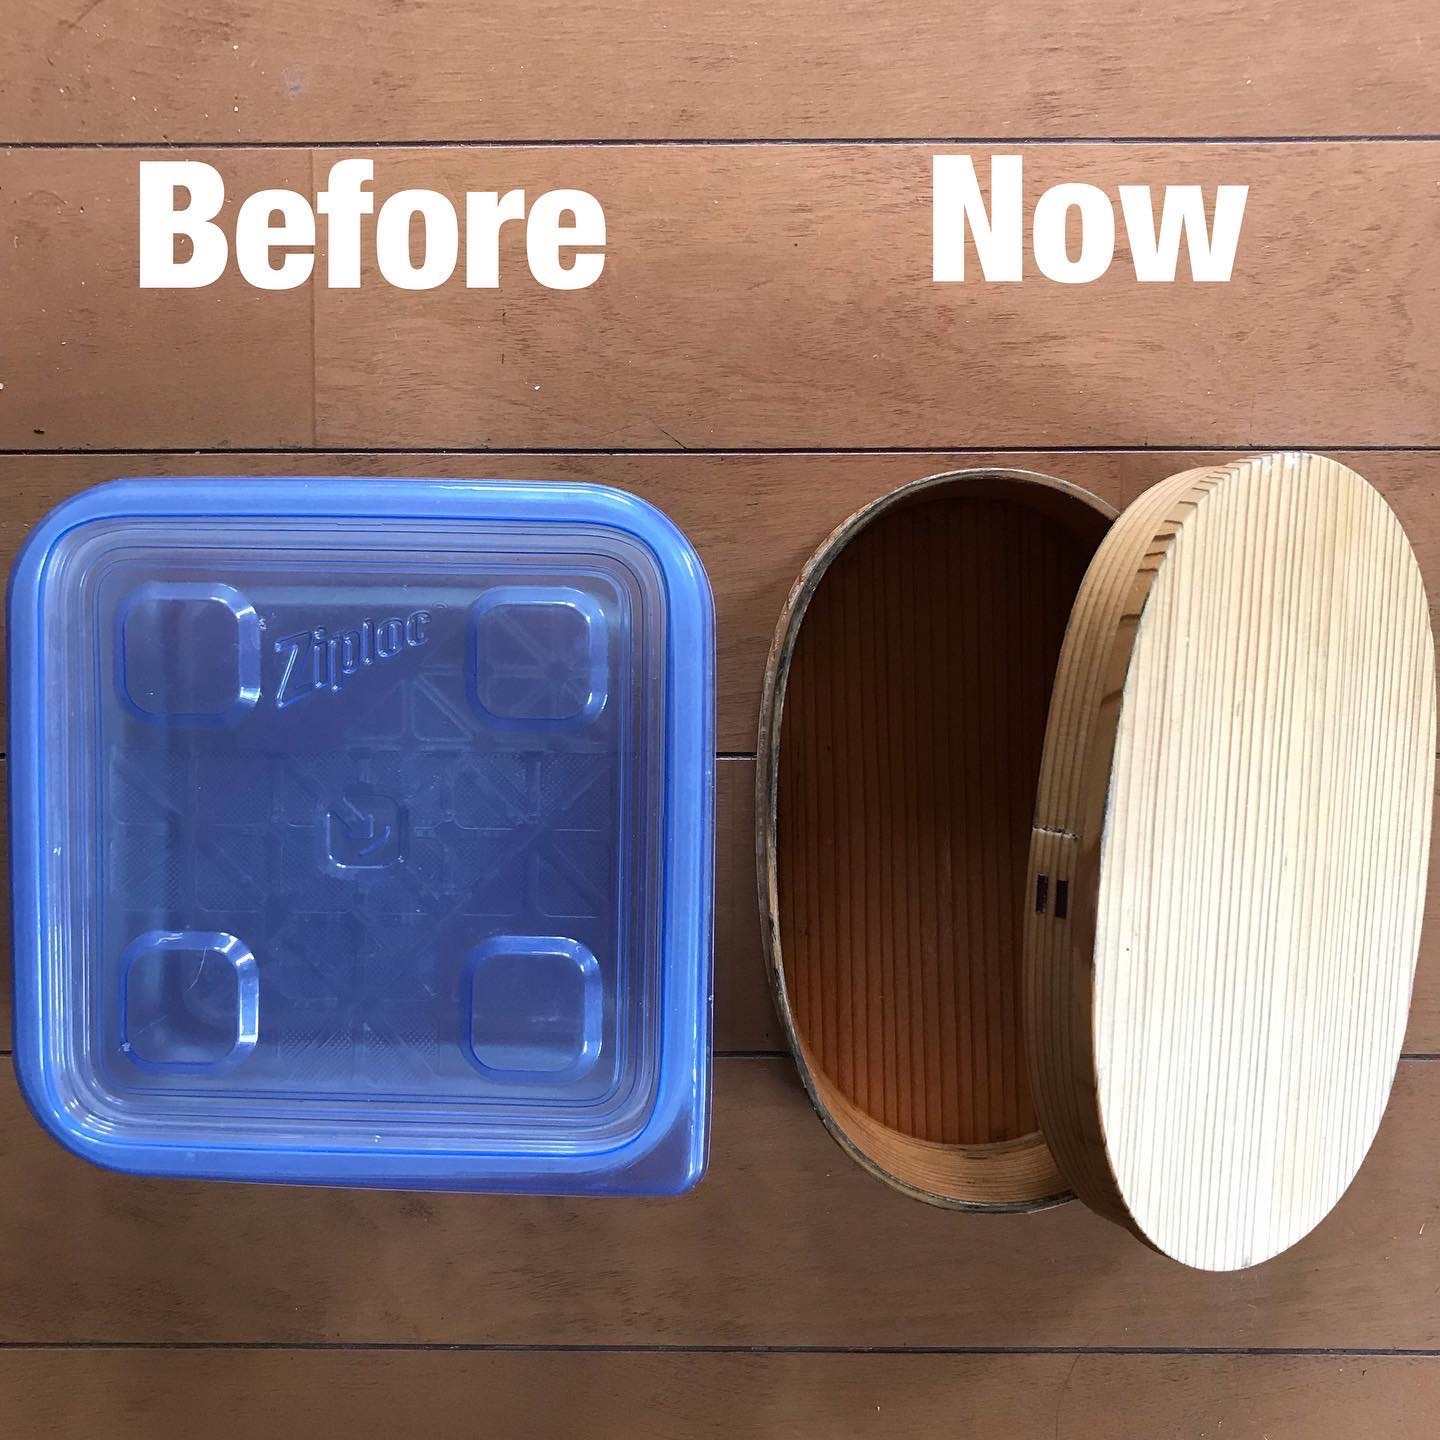 I pack my lunches every day. I have been using plastic Tupperware-like containers for years. I am also frustrated by using plastics so much as there are a lot of studies linking leached chemicals from plastics into our food. So, I LOVE the Japanese traditional wooden Bento boxes - environmental reasons no plastic! Very happy with this and glad to be off plastics and disposables. 
.